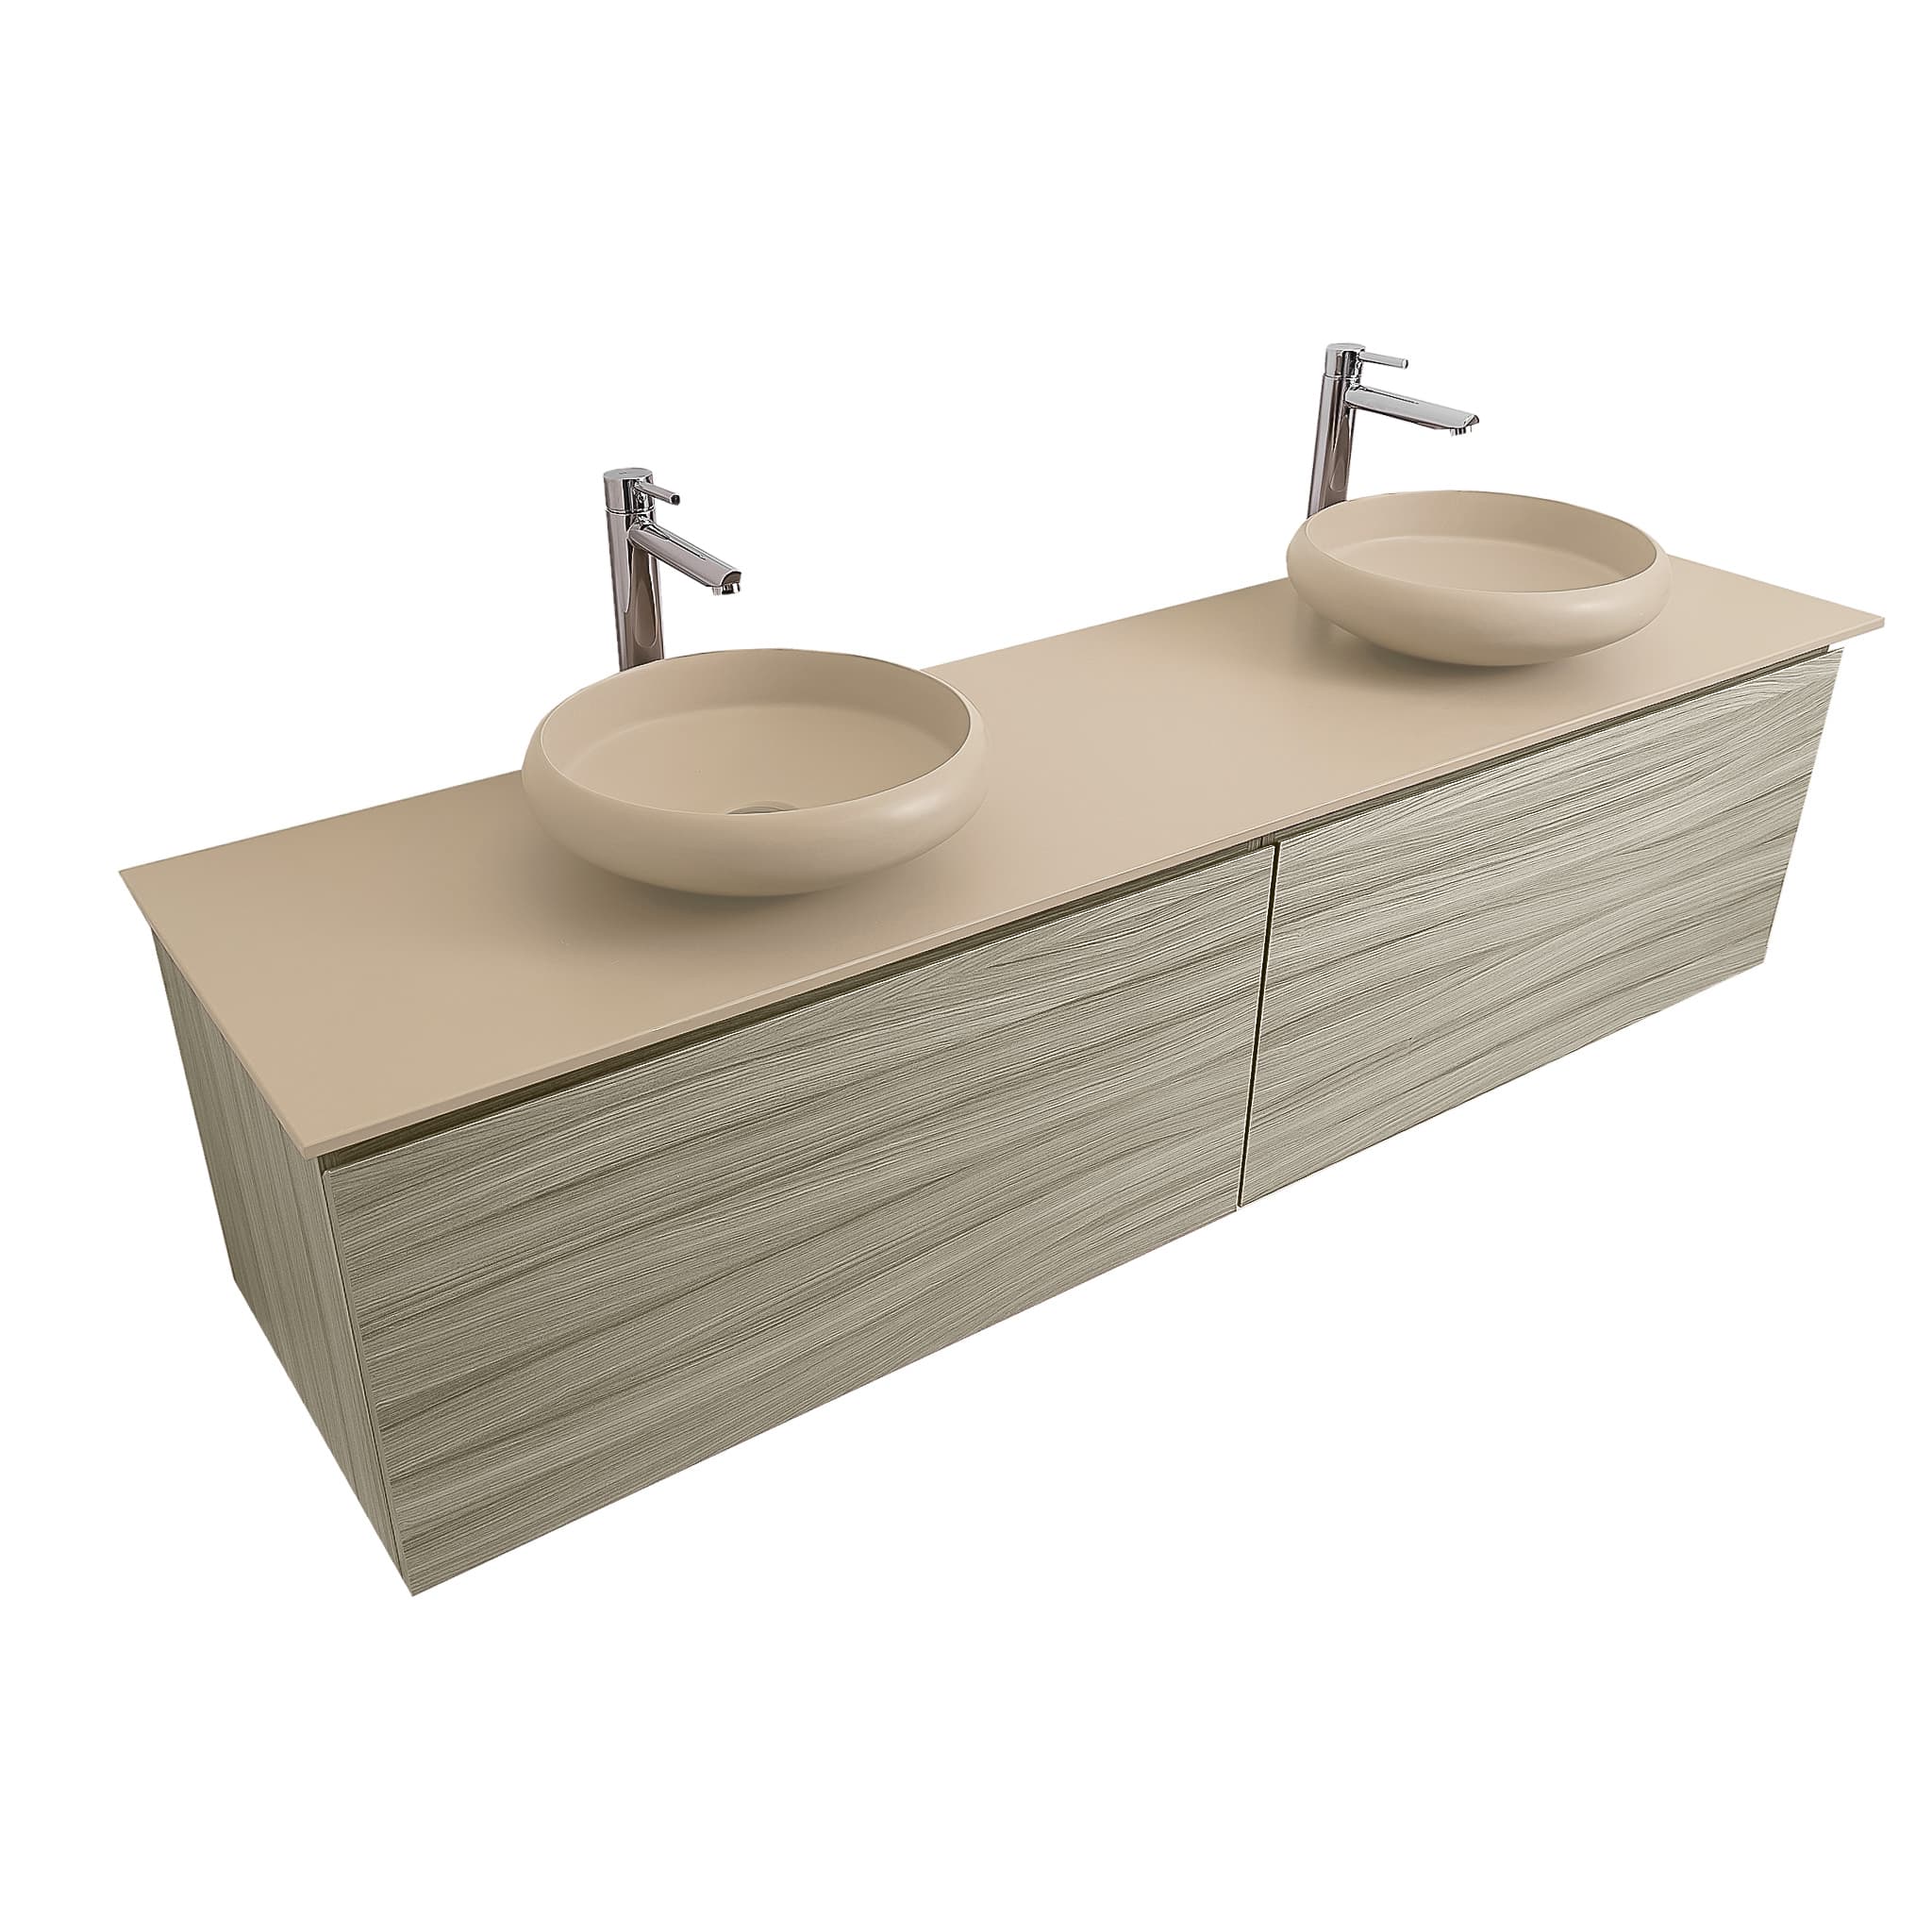 Venice 72 Nilo Grey Wood Texture Cabinet, Solid Surface Flat Taupe Counter And Two Round Solid Surface Taupe Basin 1153, Wall Mounted Modern Vanity Set